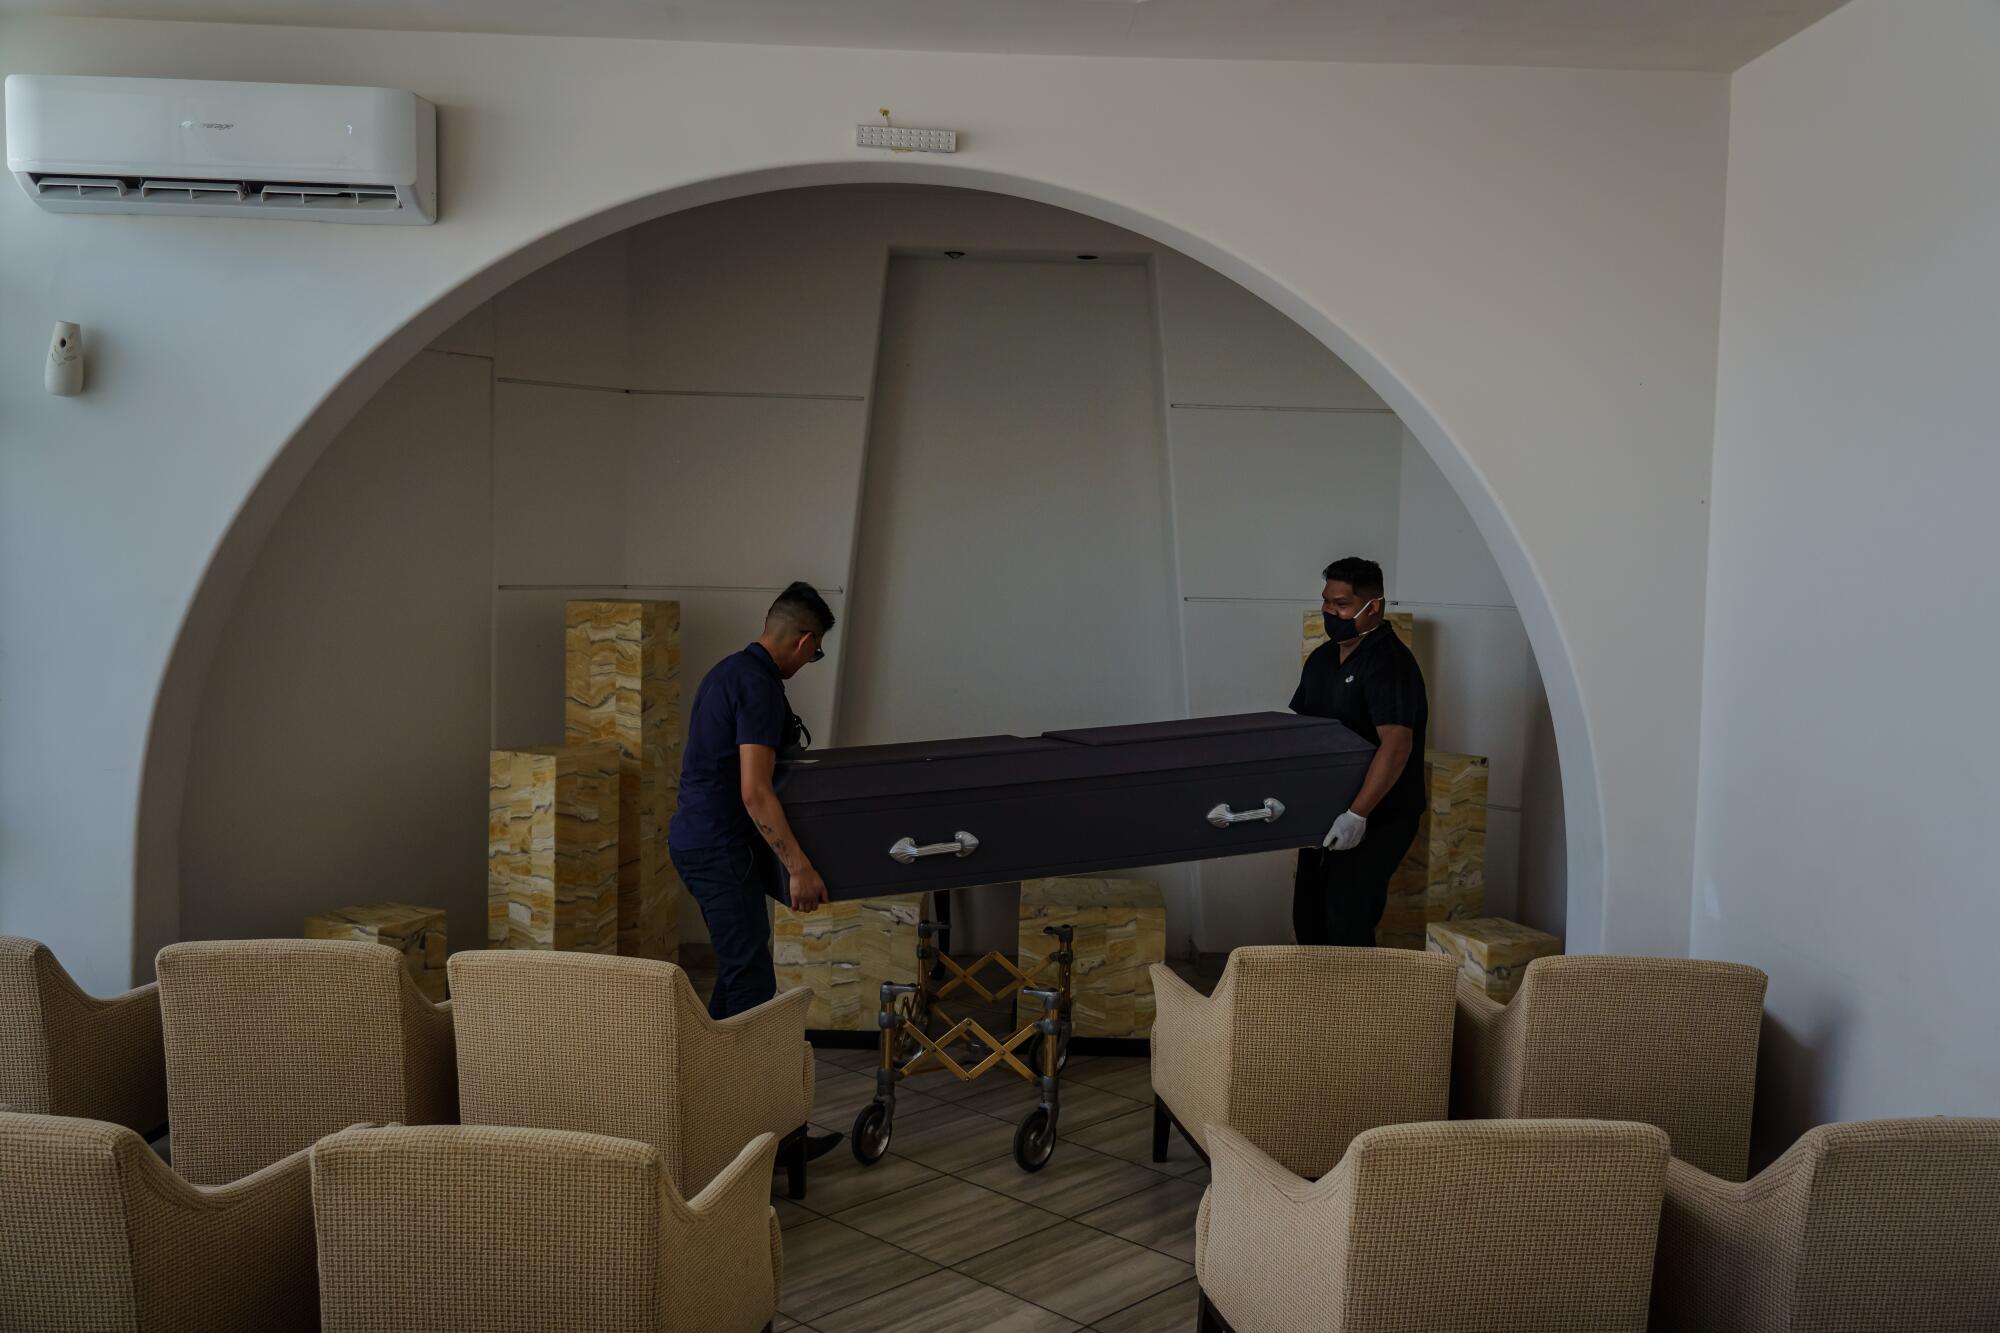 Funeral home workers prepare a casket for transport to the cemetery at the San Ramon Funeral home in Tijuana, Mexico, on April 28, 2020.